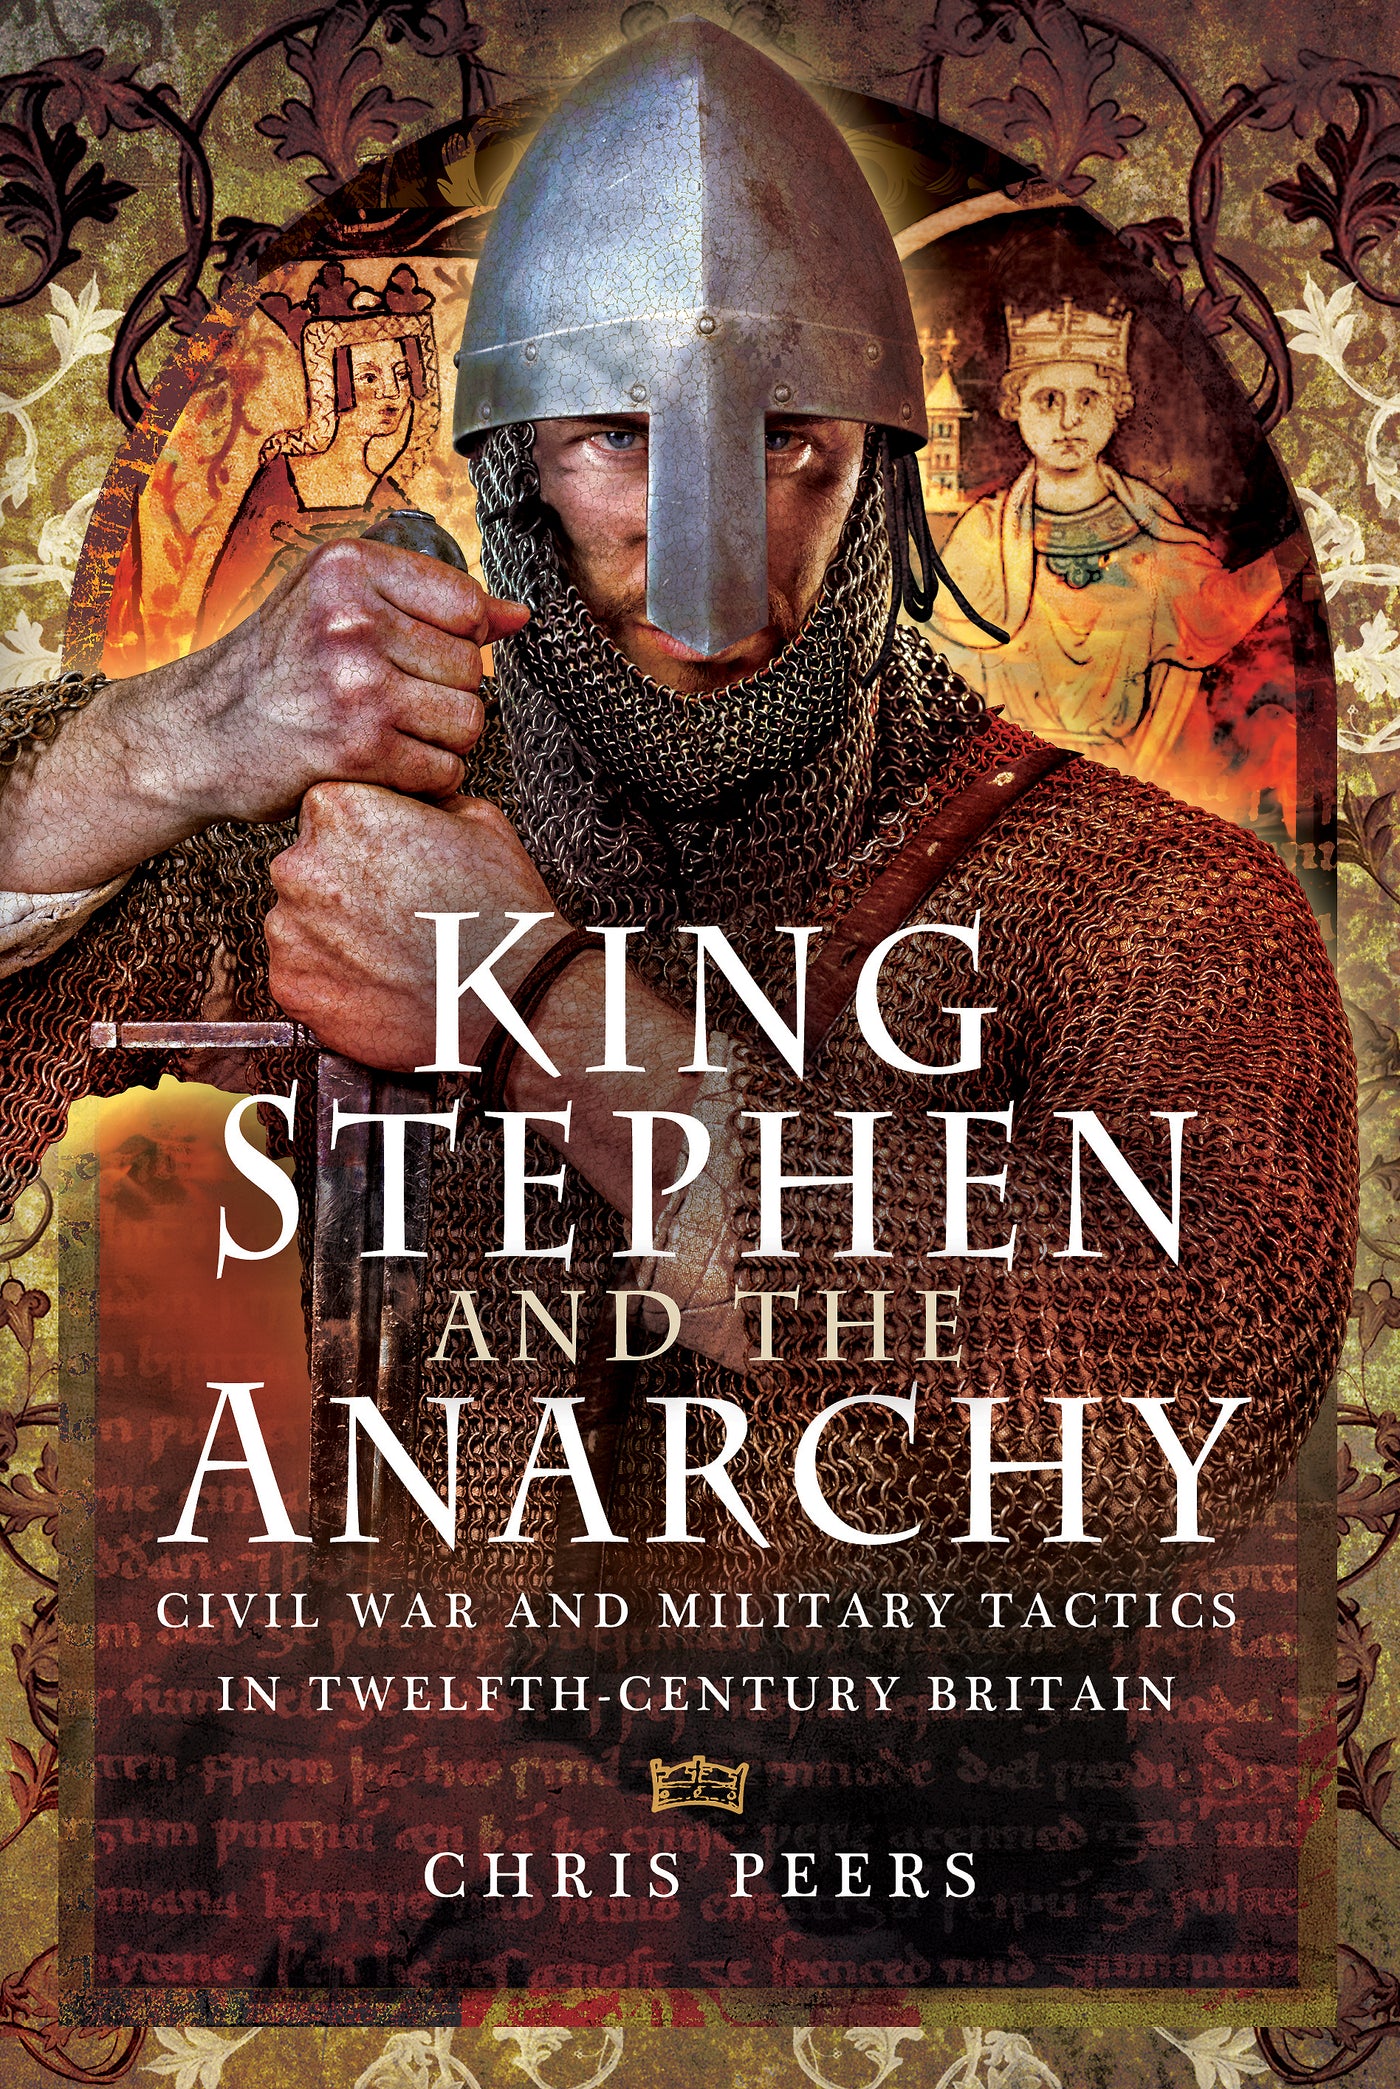 King Stephen and The Anarchy